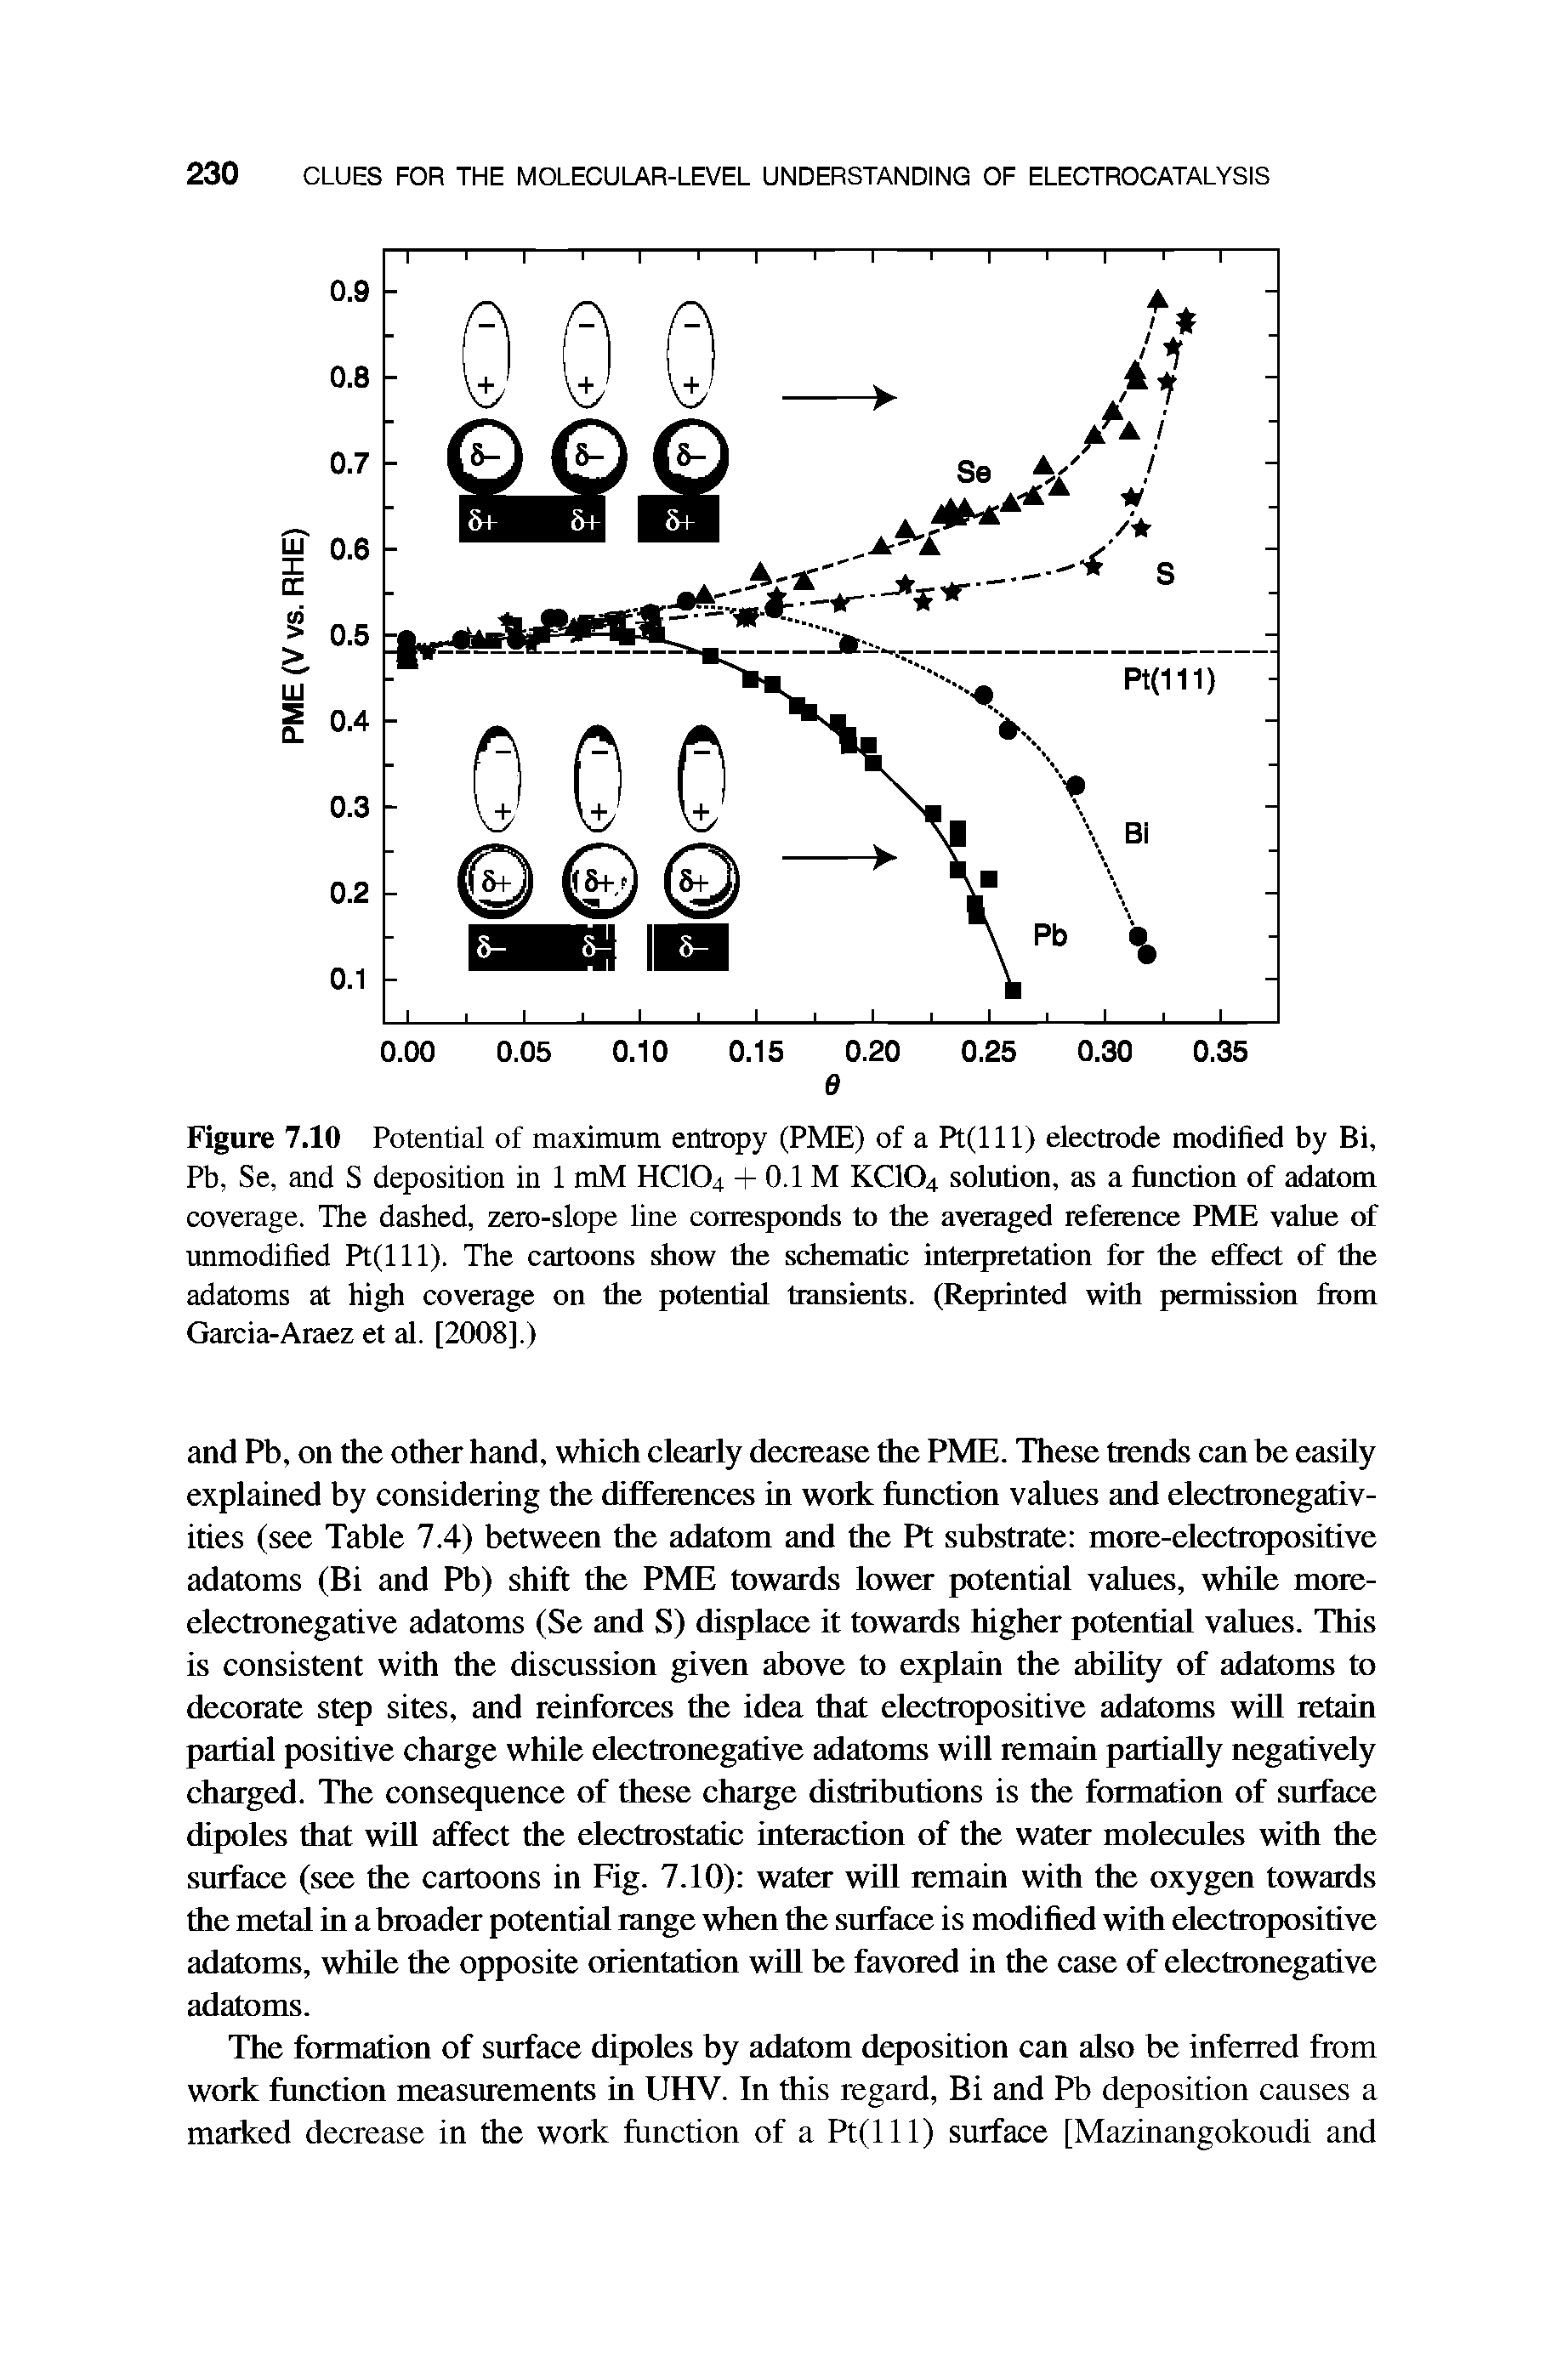 Figure 7.10 Potential of maximum entropy (PME) of a Pt(lll) electrode modified by Bi, Pb, Se, and S deposition in 1 mM HCIO4 + 0.1 M KCIO4 solution, as a function of adatom coverage. The dashed, zero-slope line corresponds to the averaged reference PME value of unmodified Pt(lll). The cartoons show the schematic interpretation for the effect of the adatoms at high coverage on the potential transients. (Reprinted with permission from Garcia-Araez et al. [2008].)...